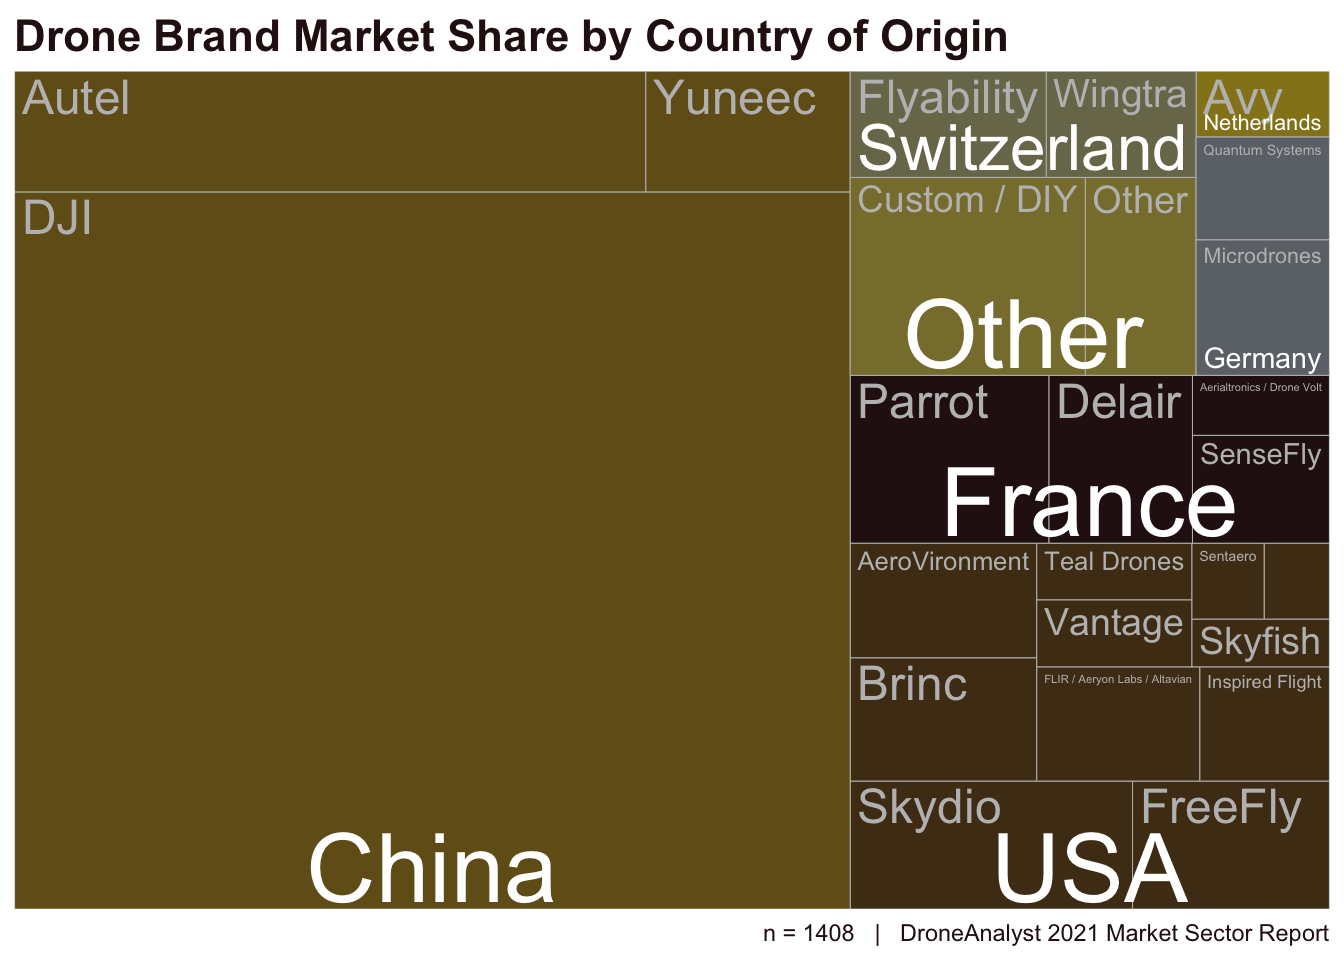 Drone Brand Market Share by COO